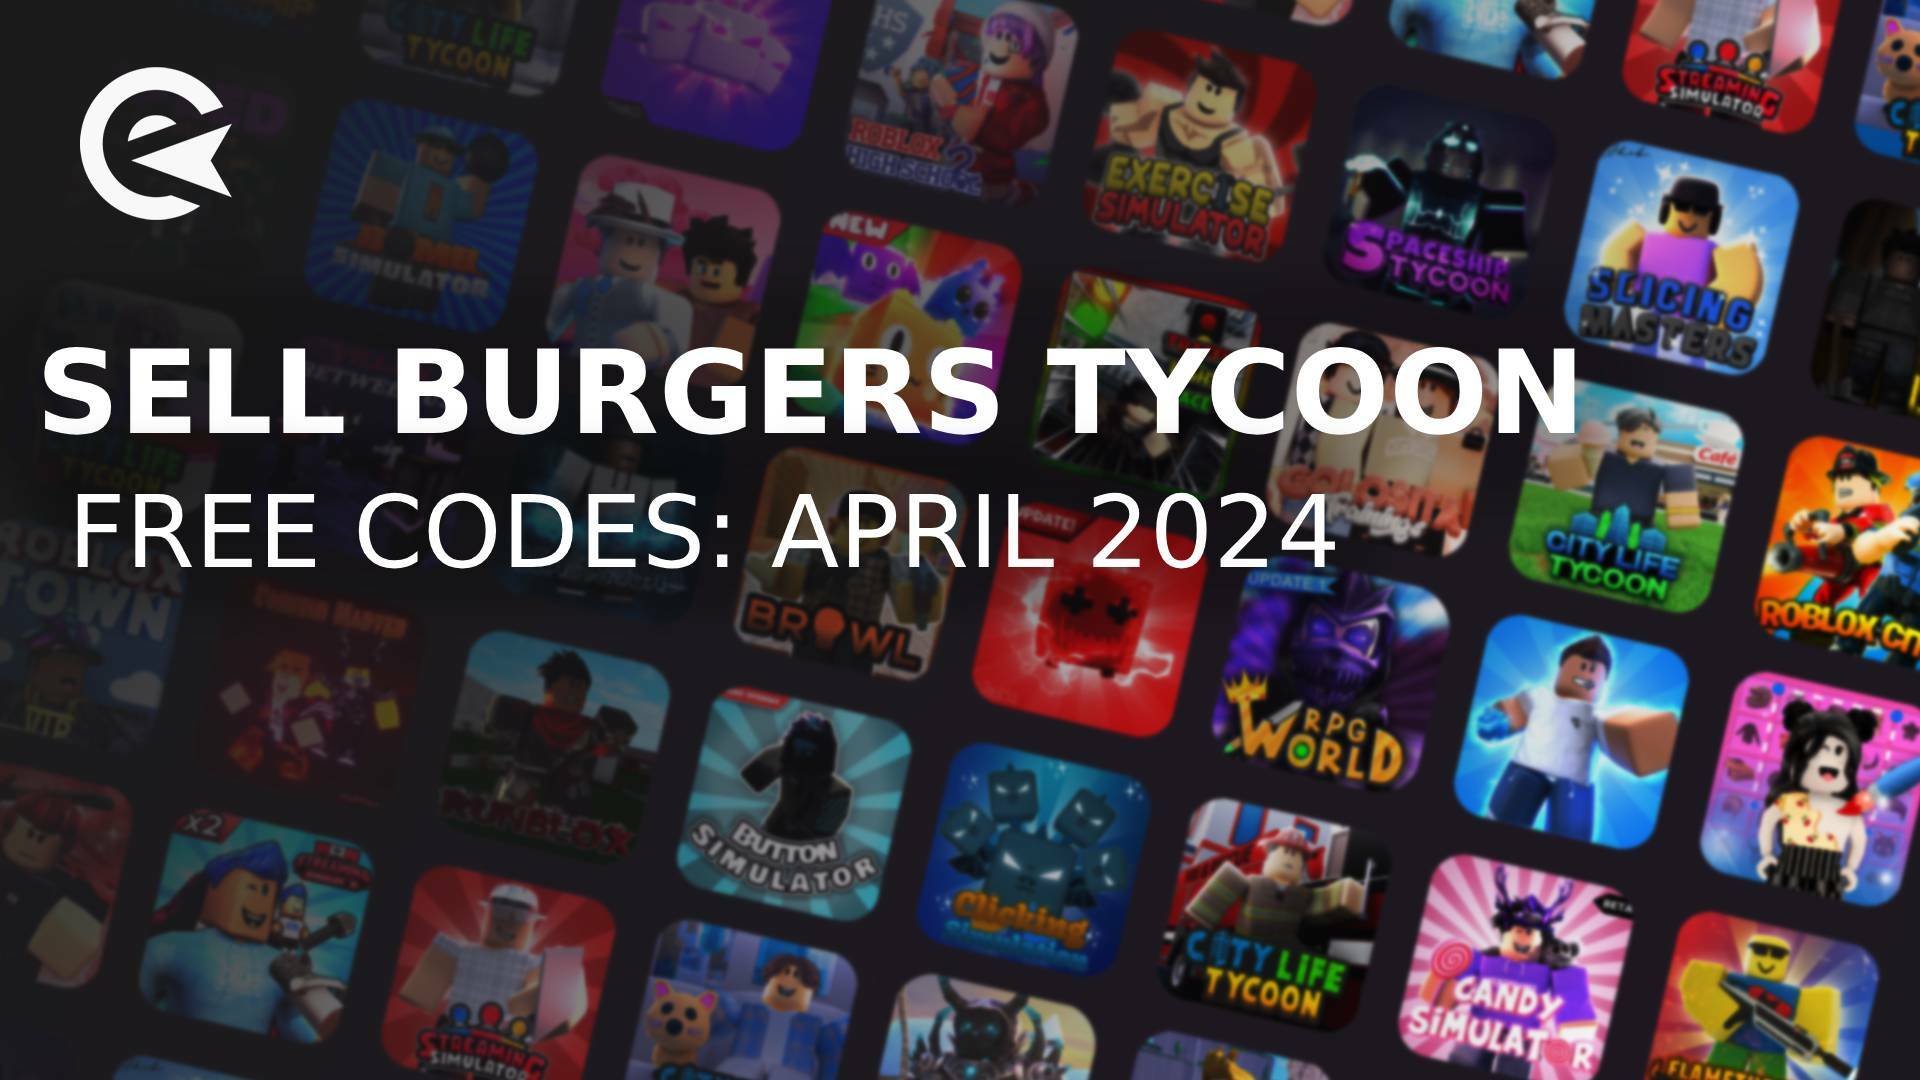 Sell burgers tycoon codes april